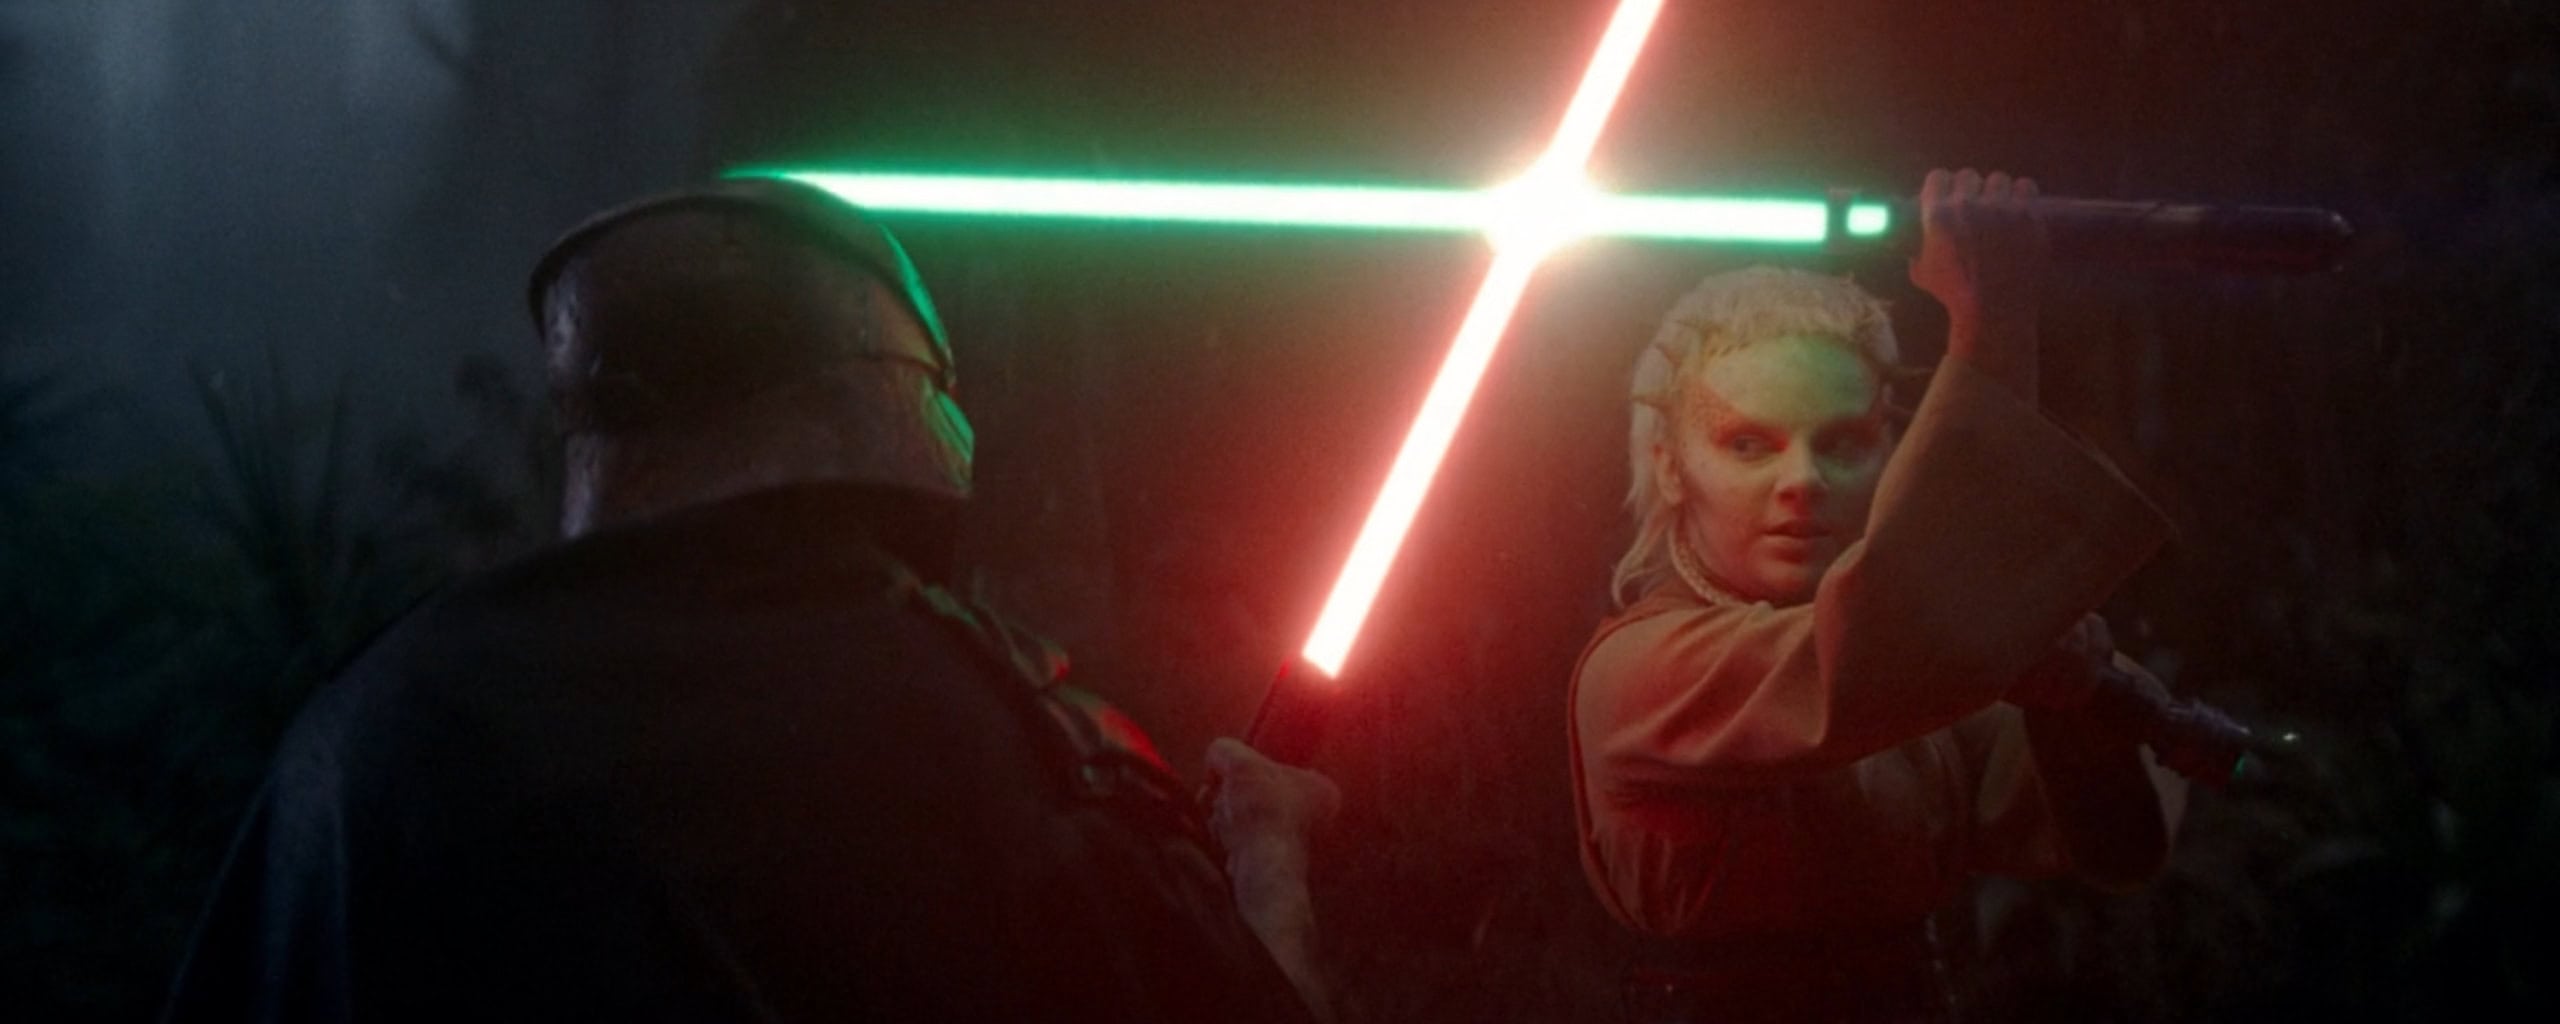 The Acolyte Episode 5 Delivers Intense Lightsaber Duels and Bold Narrative Twists